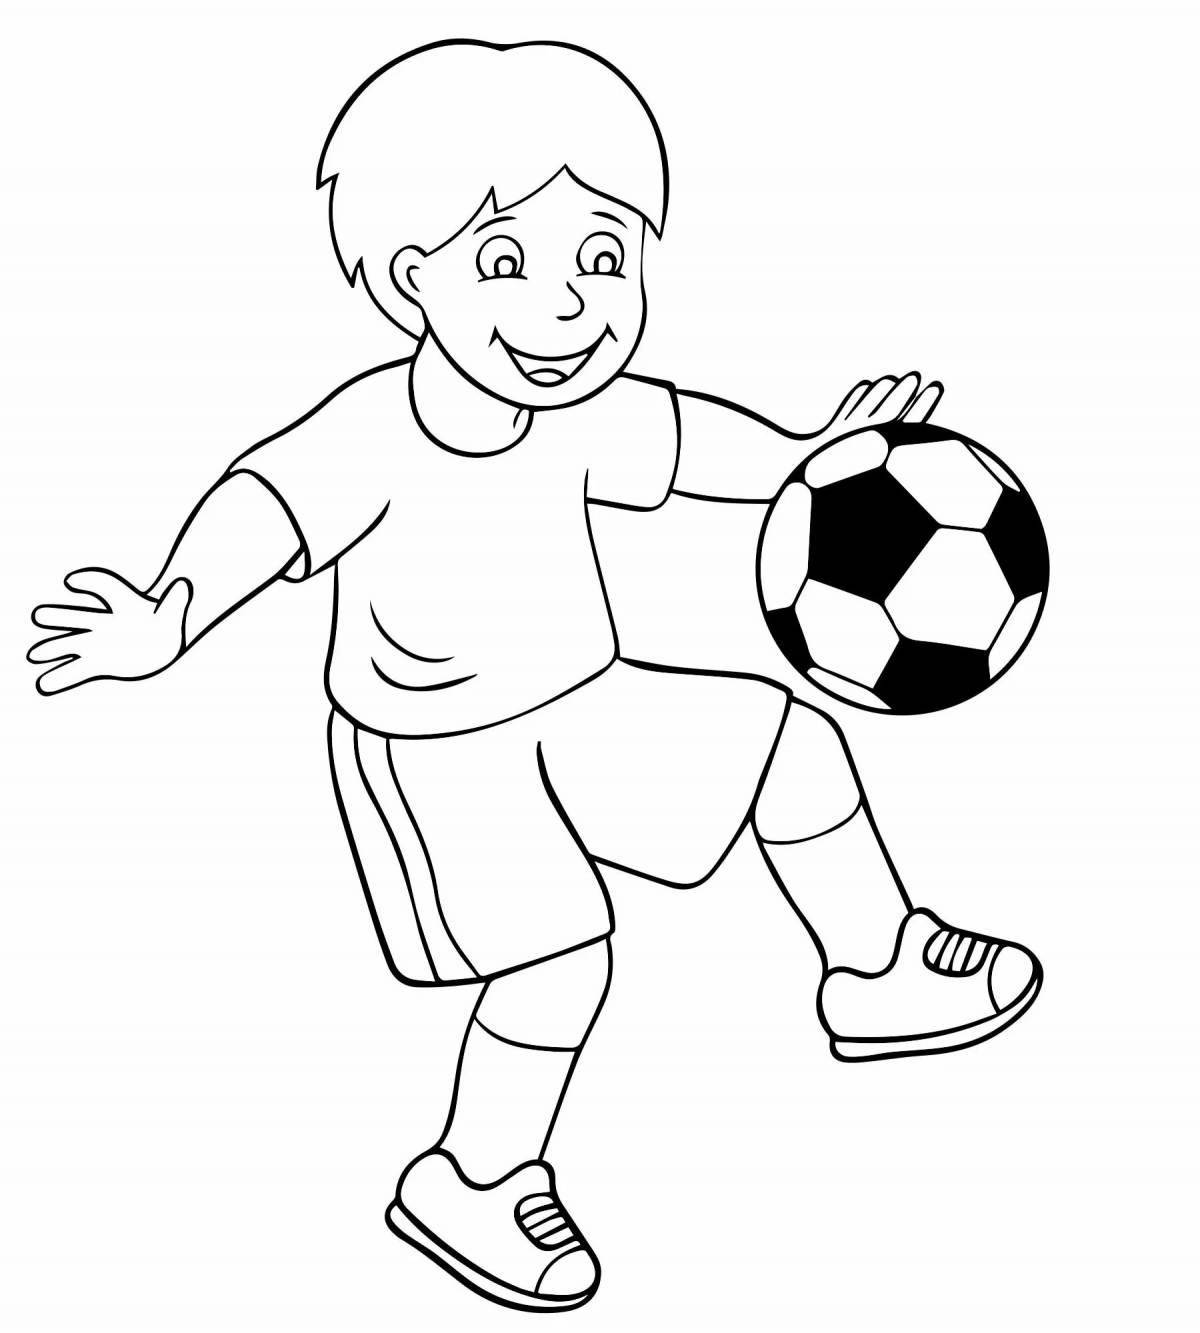 Coloring book ambitious football player